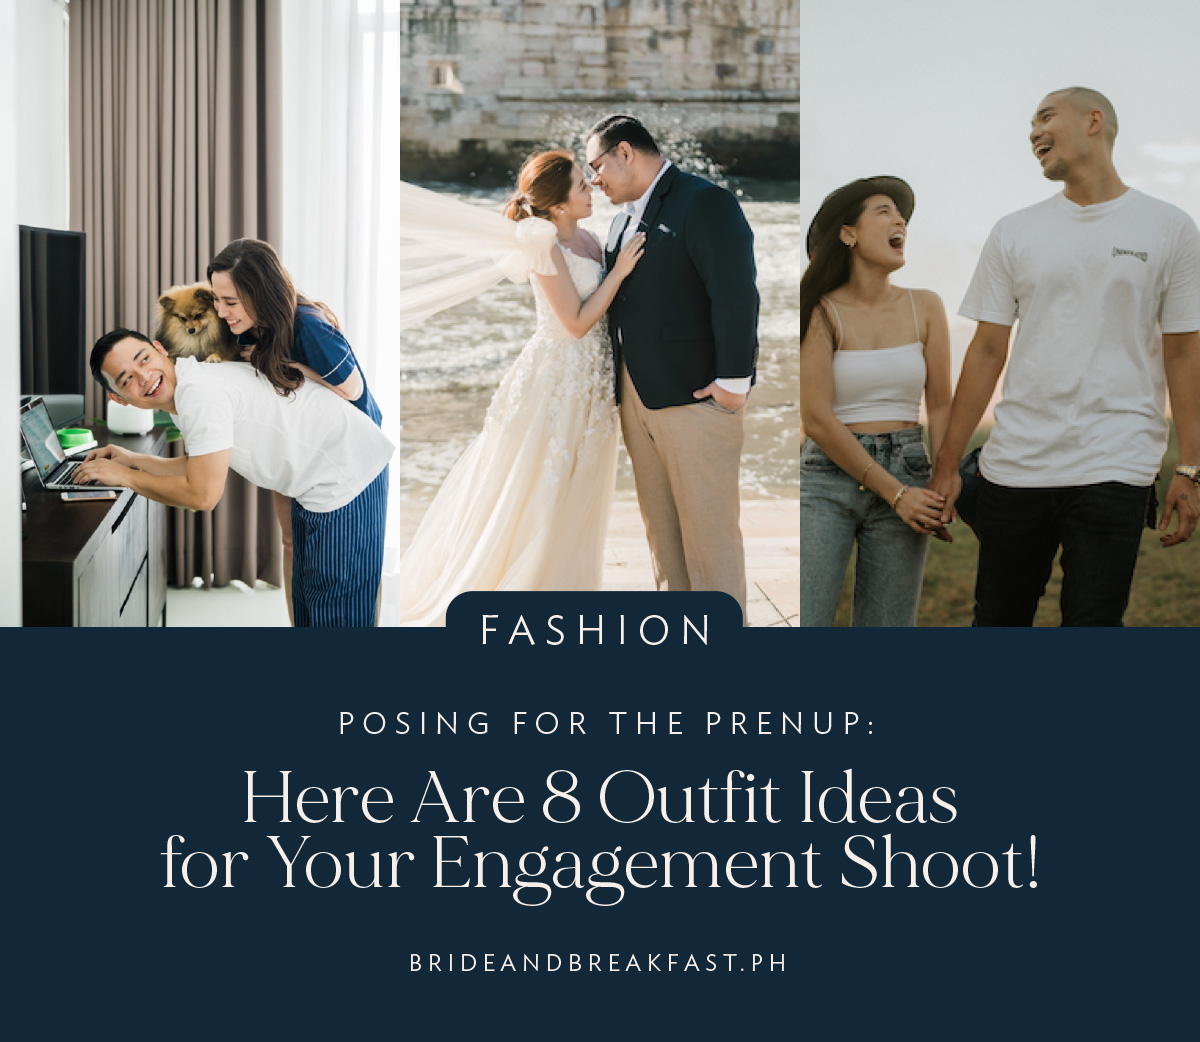 Posing for the Prenup: Here Are 8 Outfit Ideas for Your Engagement Shoot!